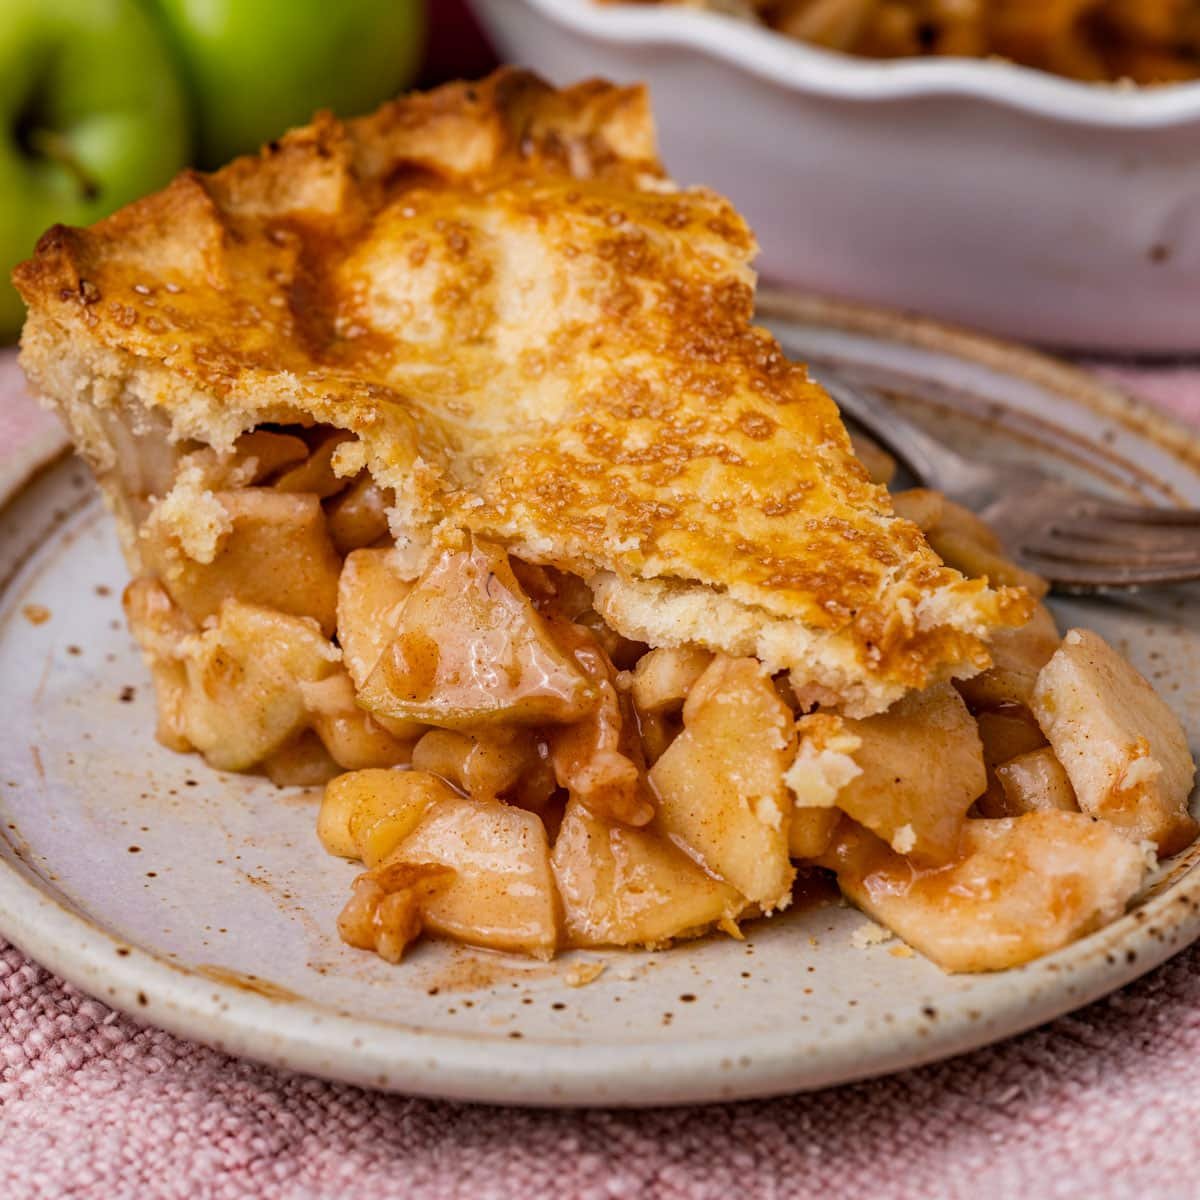 a piece of homemade apple pie on a plate